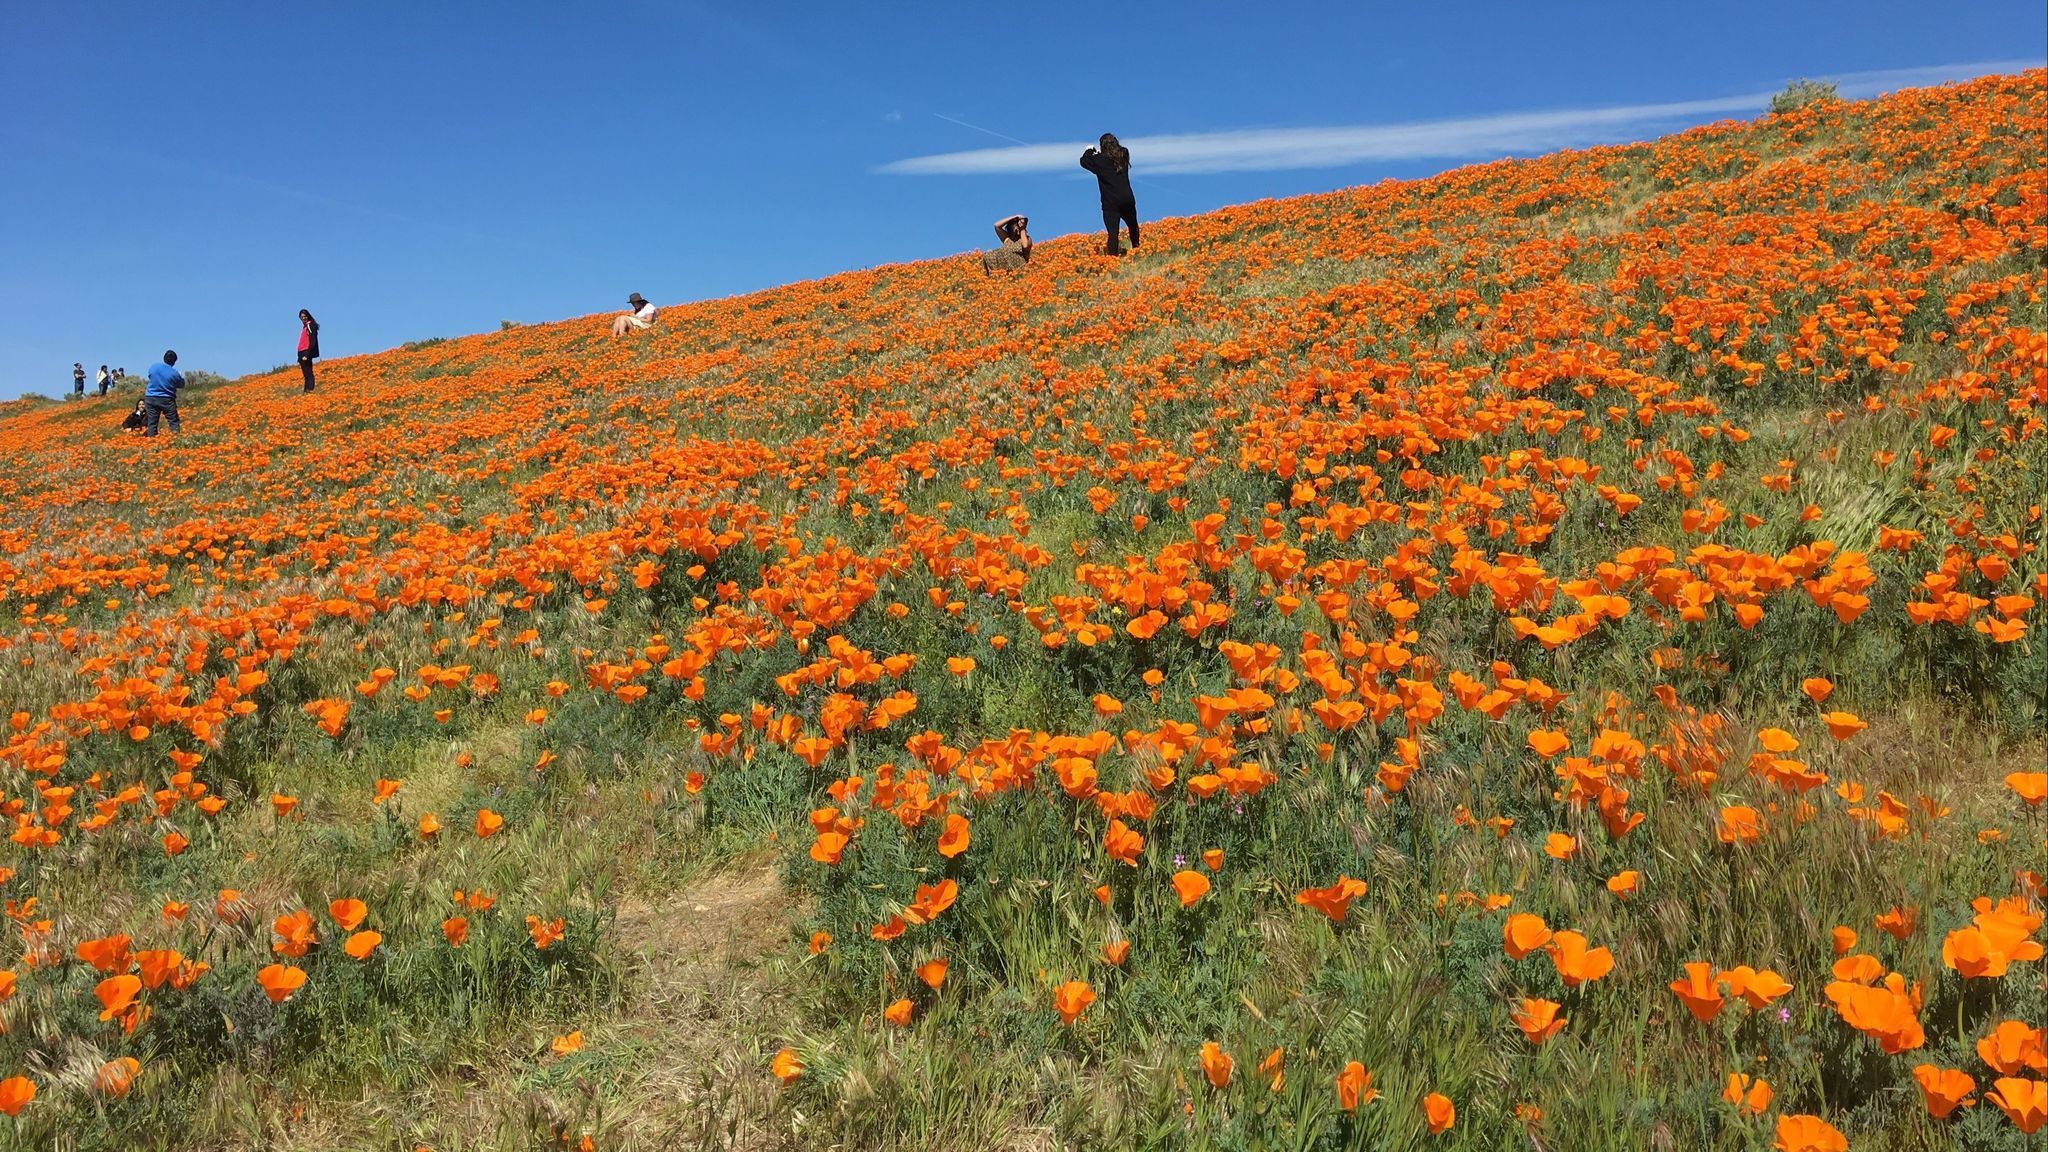 Your chance to see Southern California's epic wildflower bloom is ...